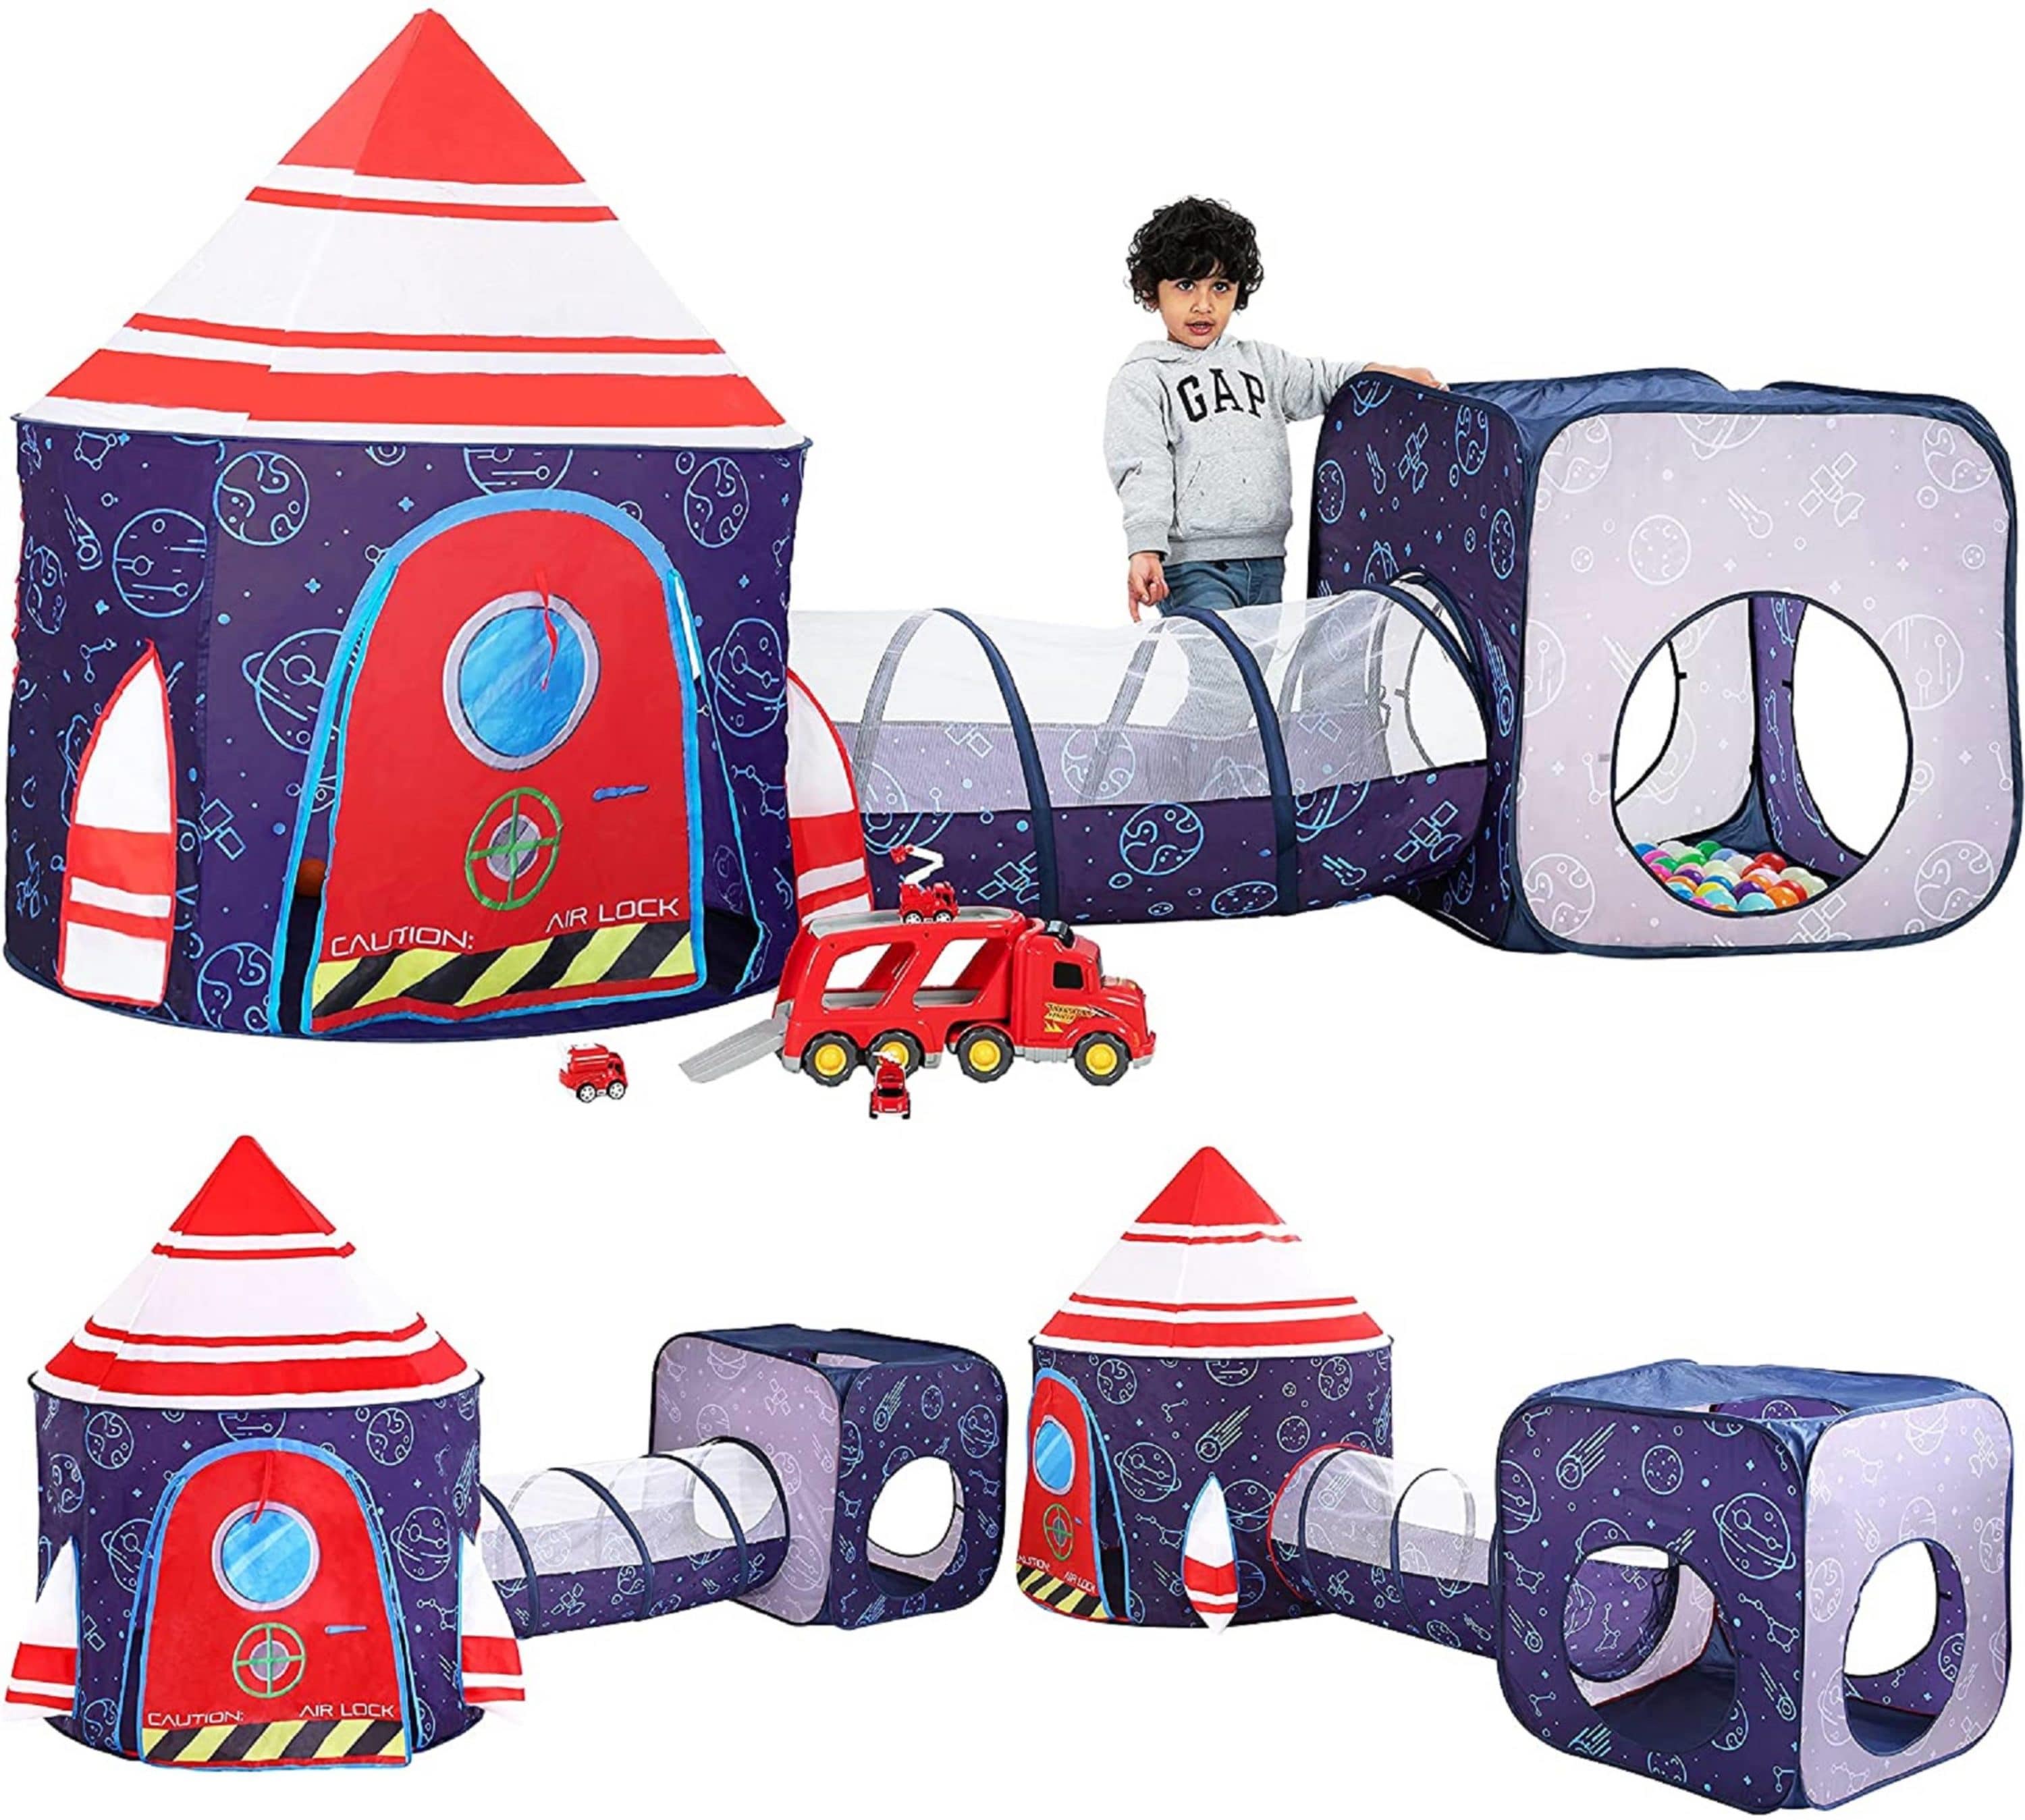 Joyin Rocket Play Tent Set with Tunnel and Cube - Easy Assembly -  Indoor/Outdoor Playhouse for Kids - Safe and Durable - Includes Carry Tote  in the Playhouses department at